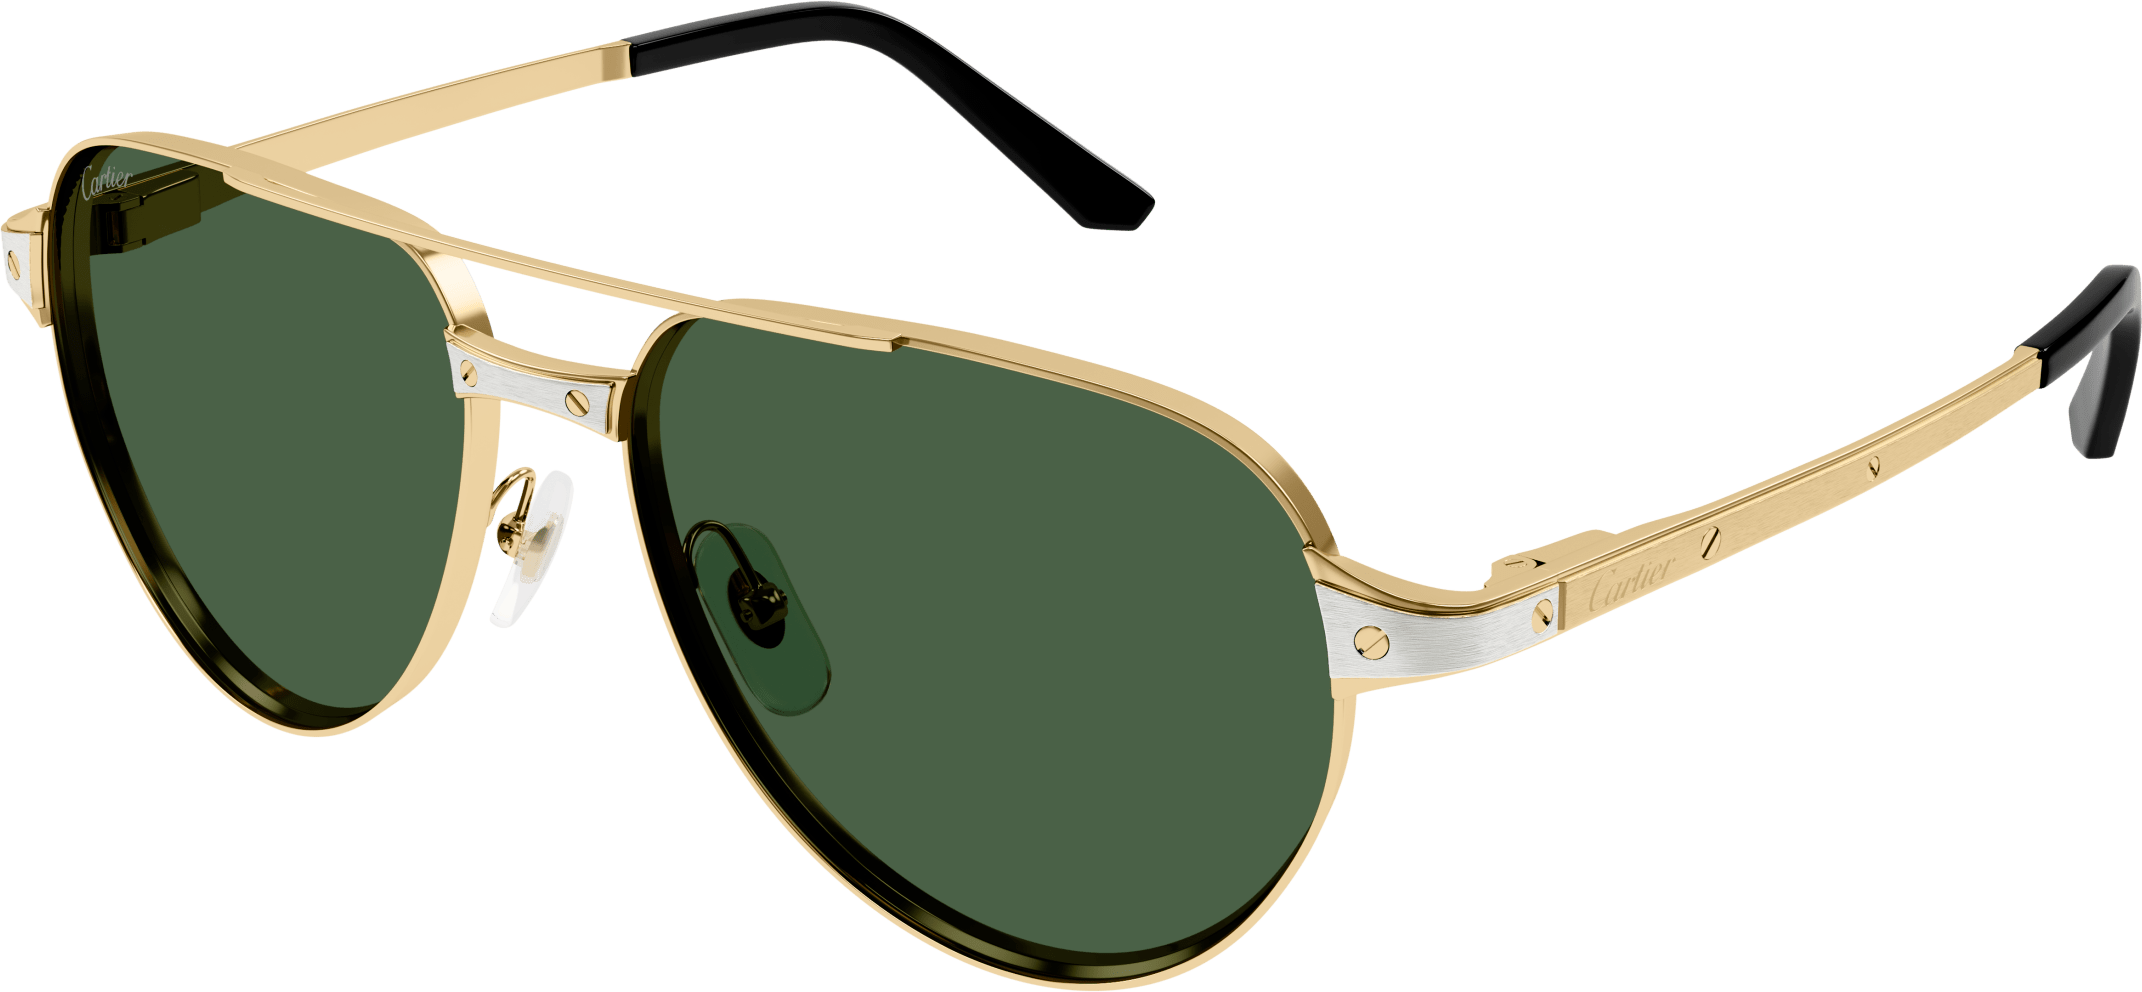 Color_CT0425S-002 - GOLD - GREEN - AR (ANTI REFLECTIVE) - POLARIZED